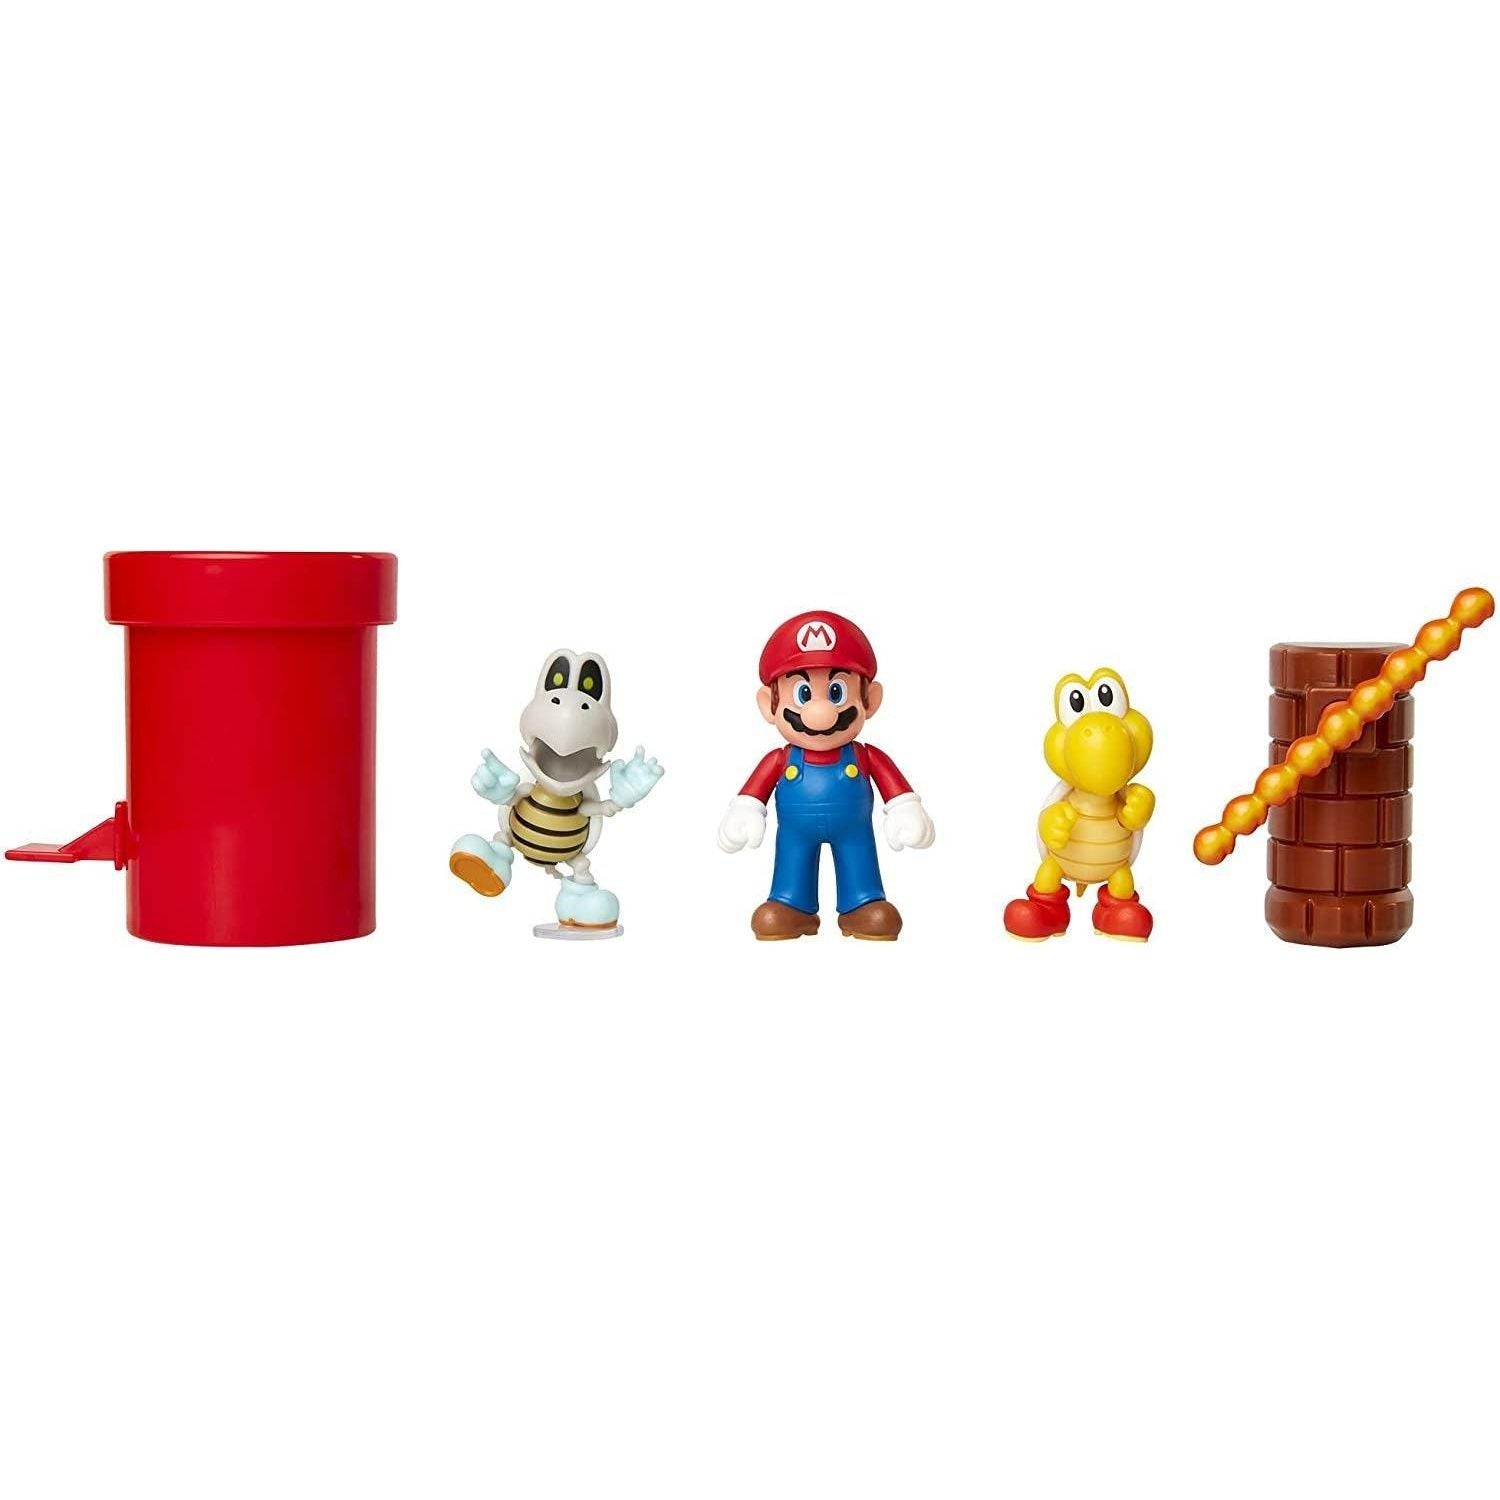 SUPER MARIO Nintendo Dungeon 2.5” Figure Multipack Diorama Set with Accessories - BumbleToys - 4+ Years, 5-7 Years, Boys, LEGO, OXE, Pre-Order, Super Mario